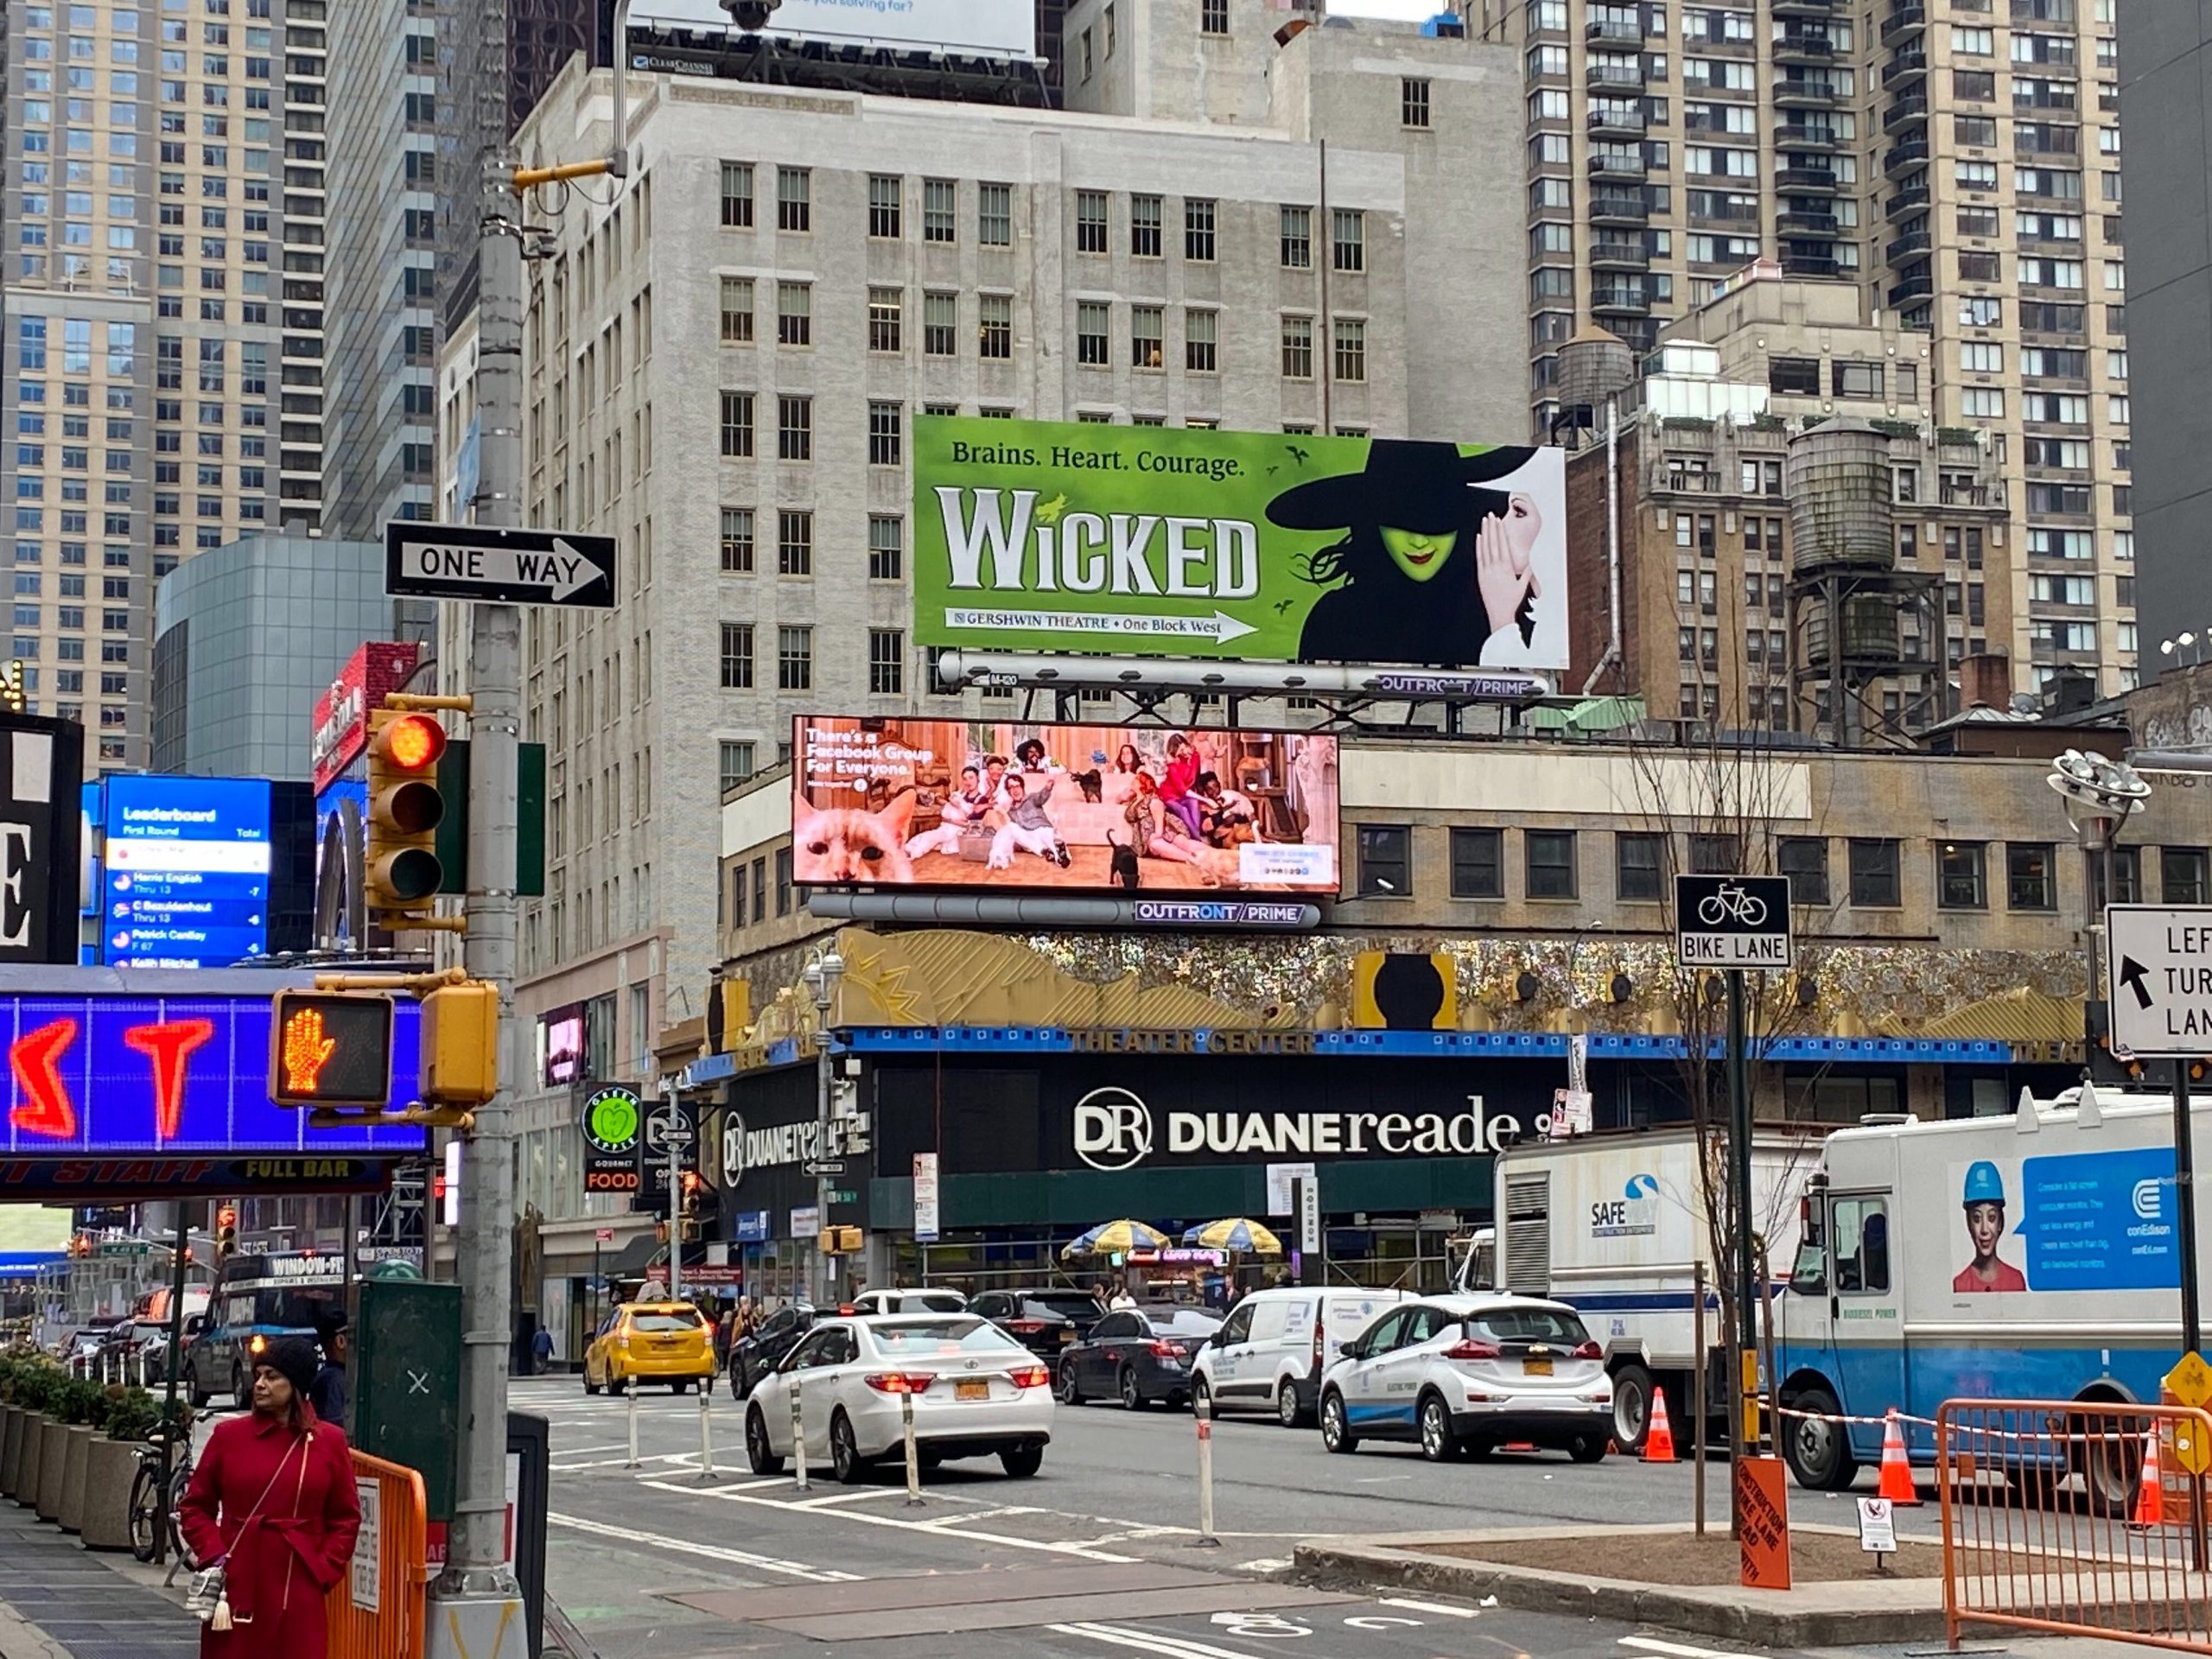 PHOTO: A busy intersection with a billboard for “Wicked.” Photo by The Signal Executive Editor Emily Nichelle Wolfe